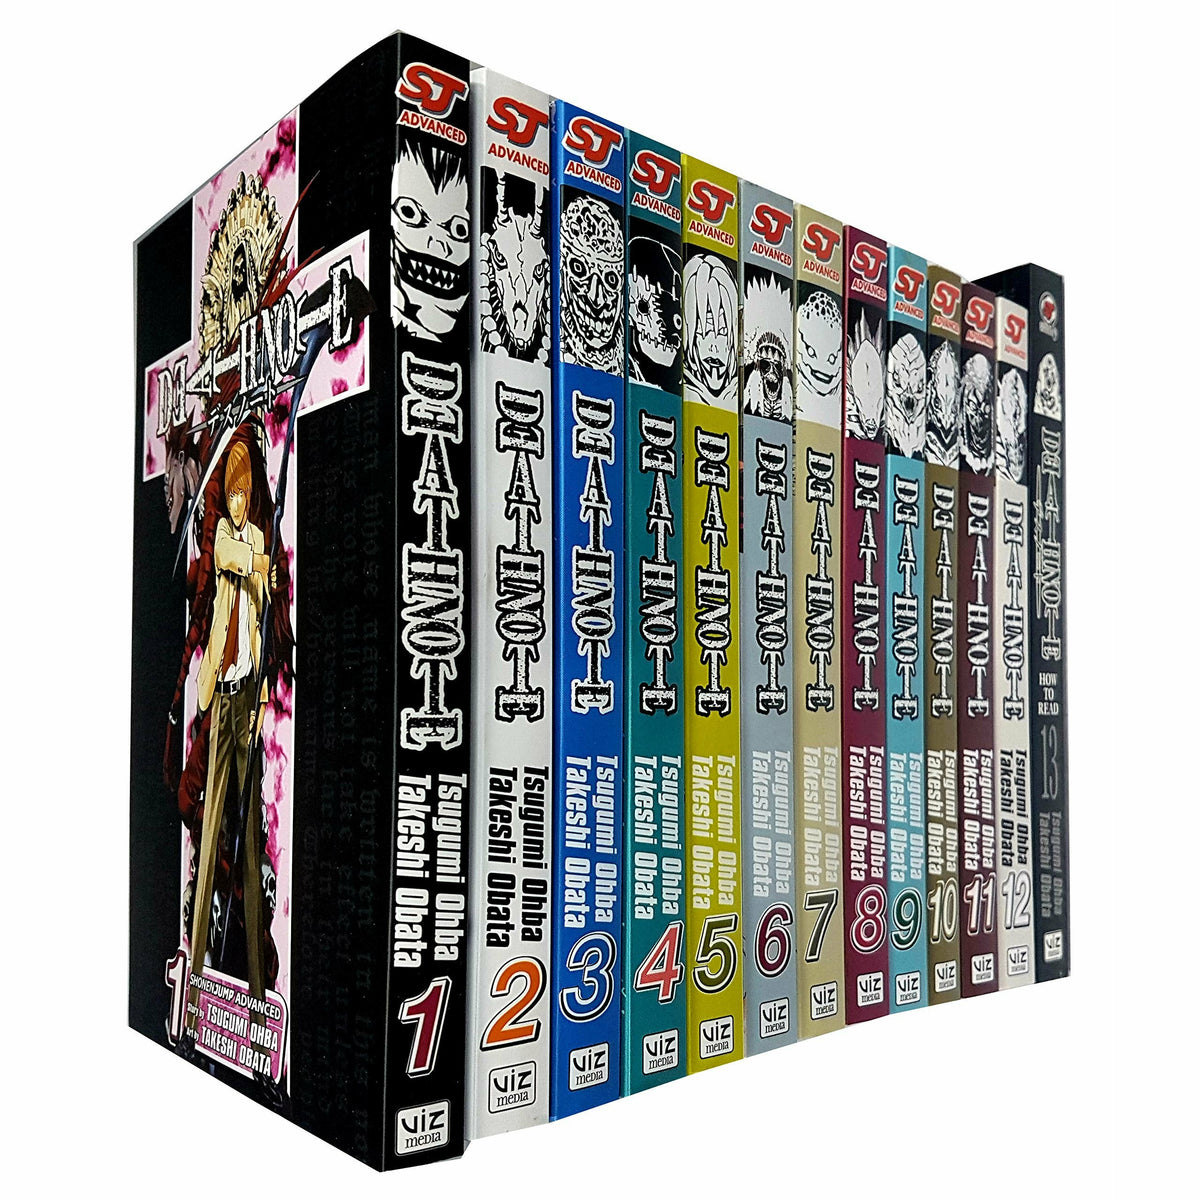 Death Note (Complete Manga Collection Set (Japanese Edition), Volumes 1-13)